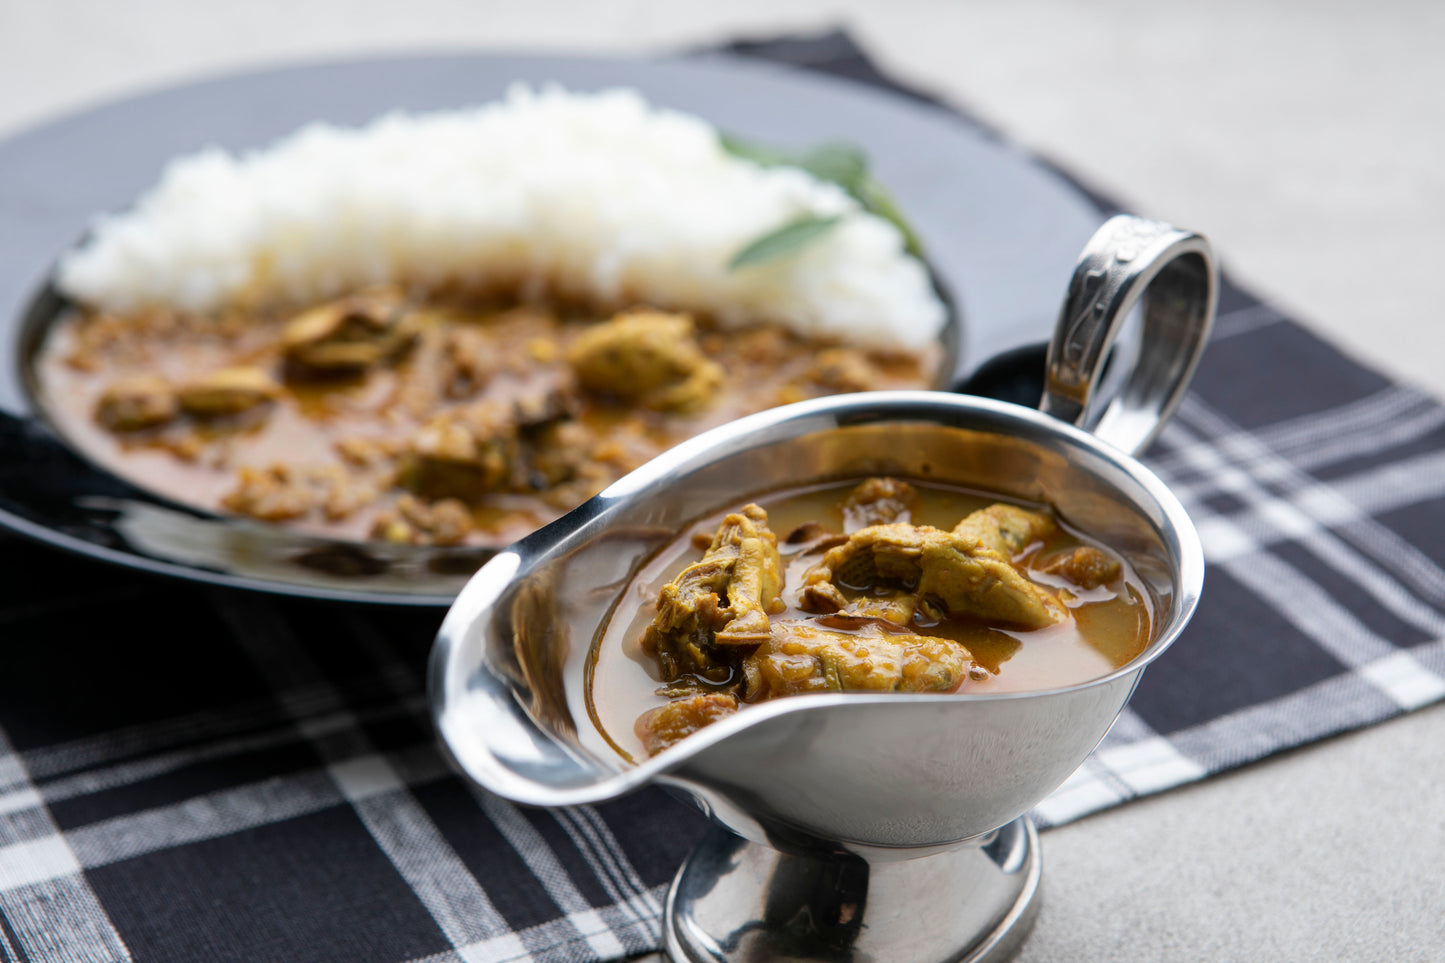 OYSTER SPICE CURRY